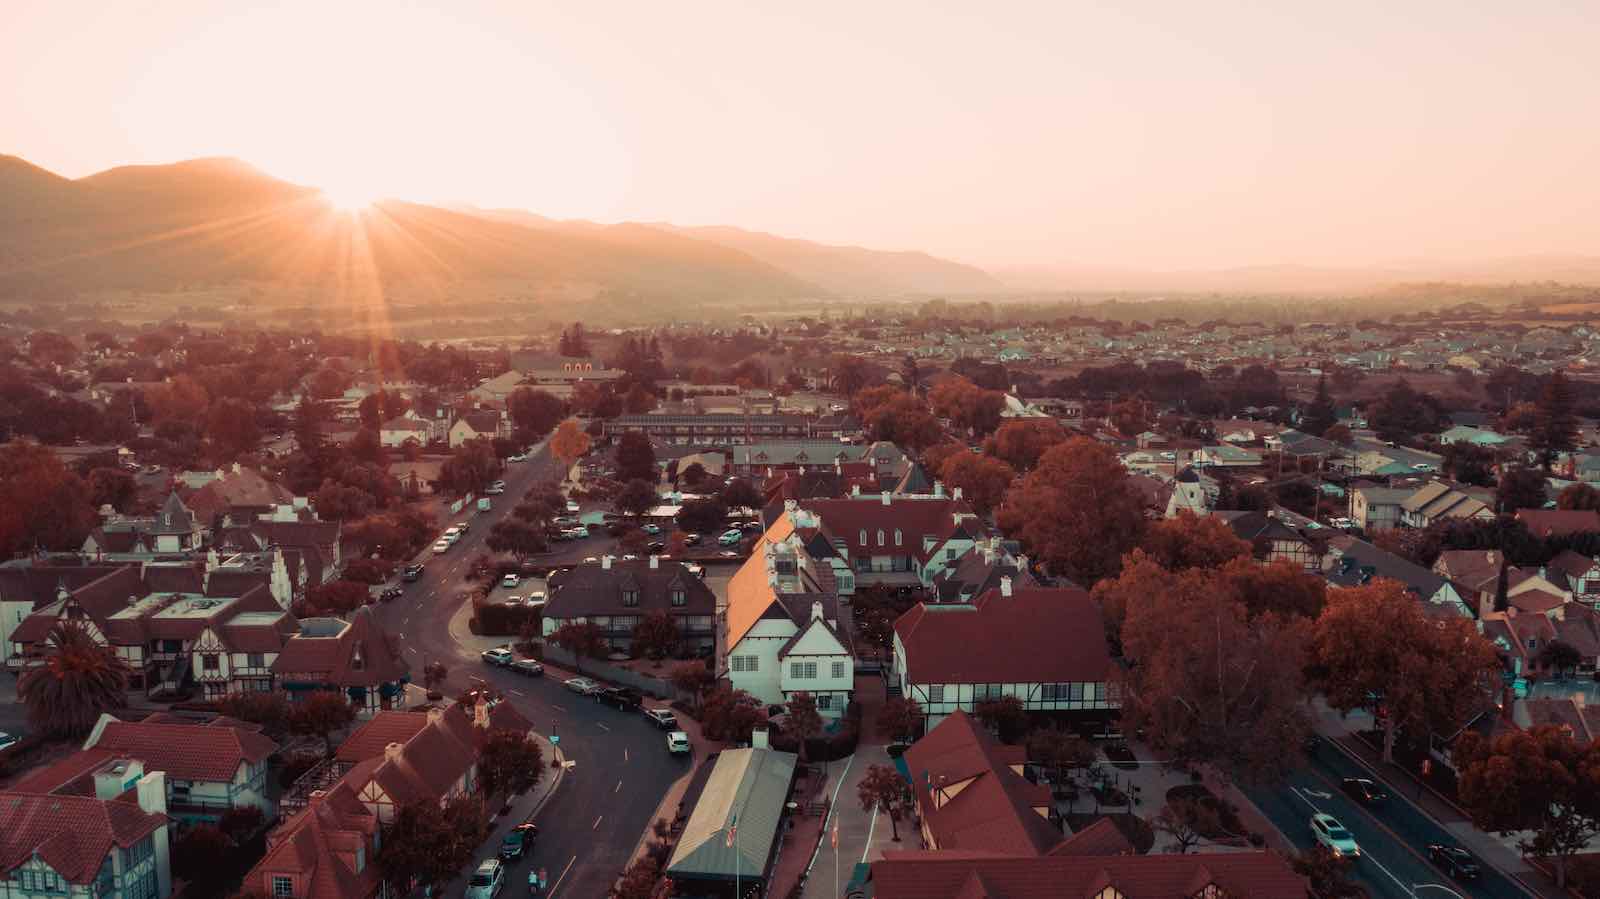 Aerial photograph of the town of Solvang, California